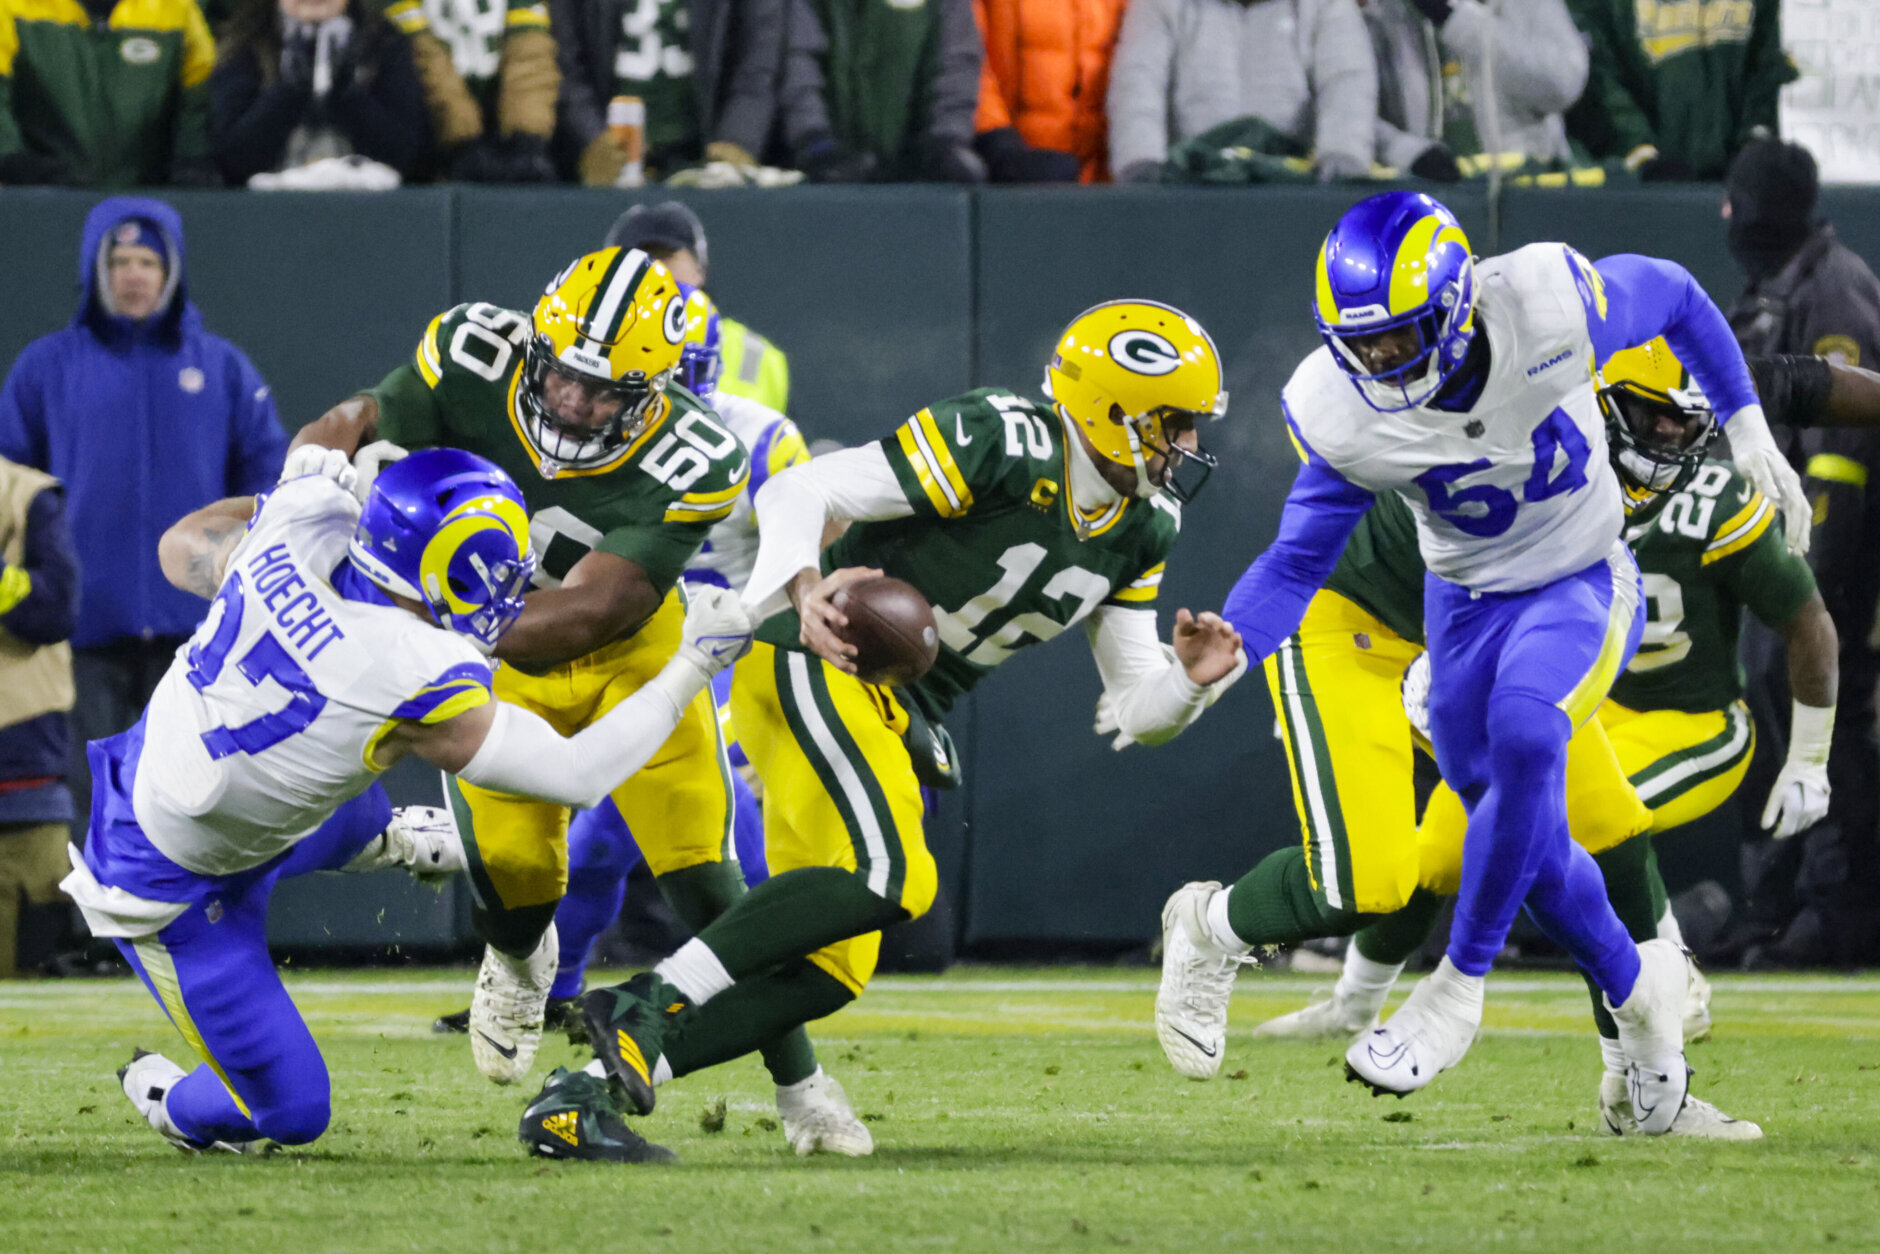 <p><em><strong>Rams 12</strong></em><br />
<em><strong>Packers 24</strong></em></p>
<p>Green Bay&#8217;s playoff chances are dead. They just won&#8217;t lie down.</p>
